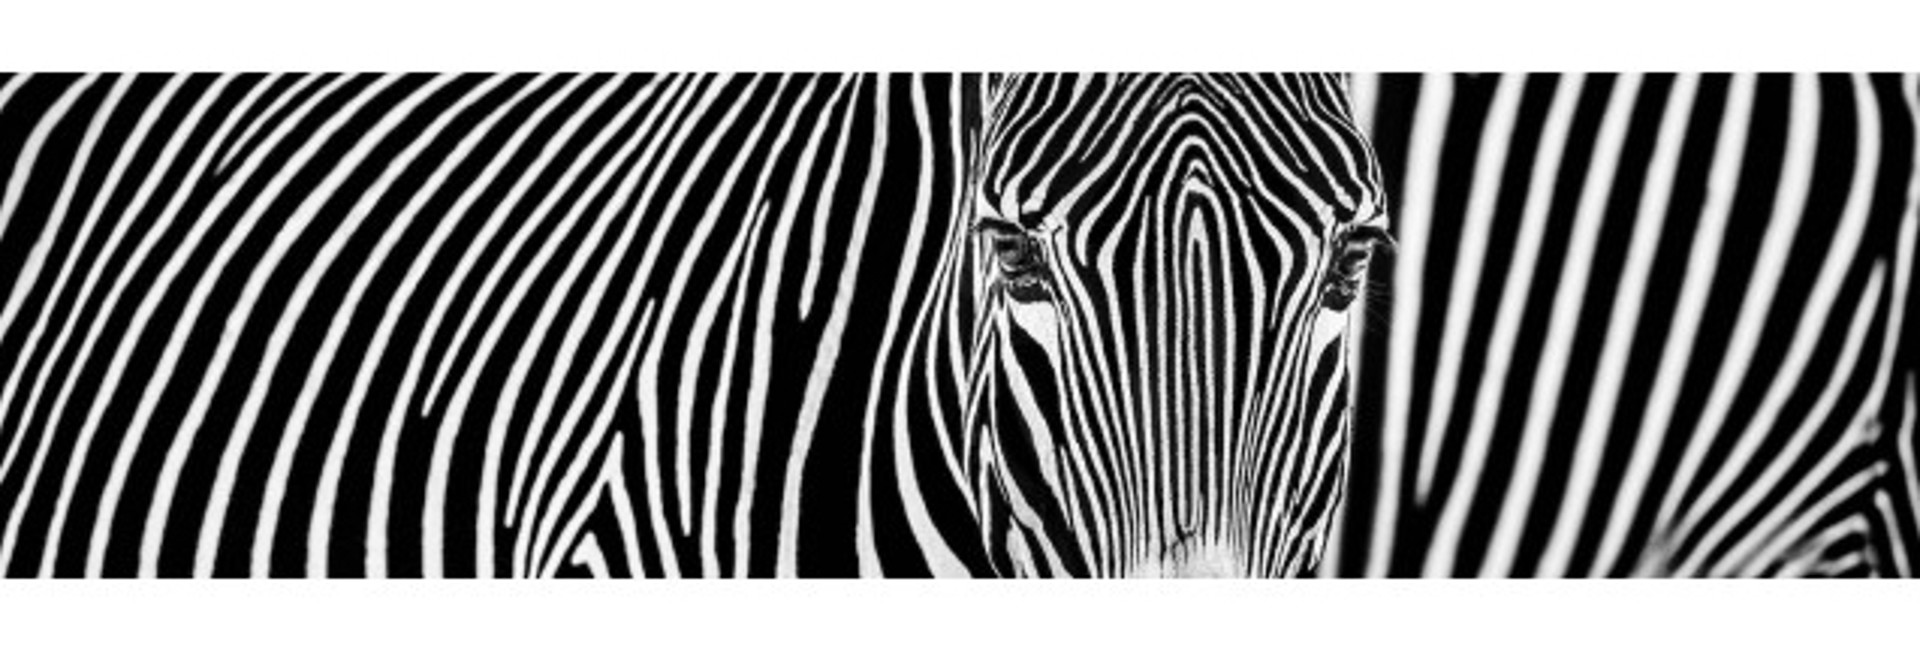 Parallel Lines by David Yarrow